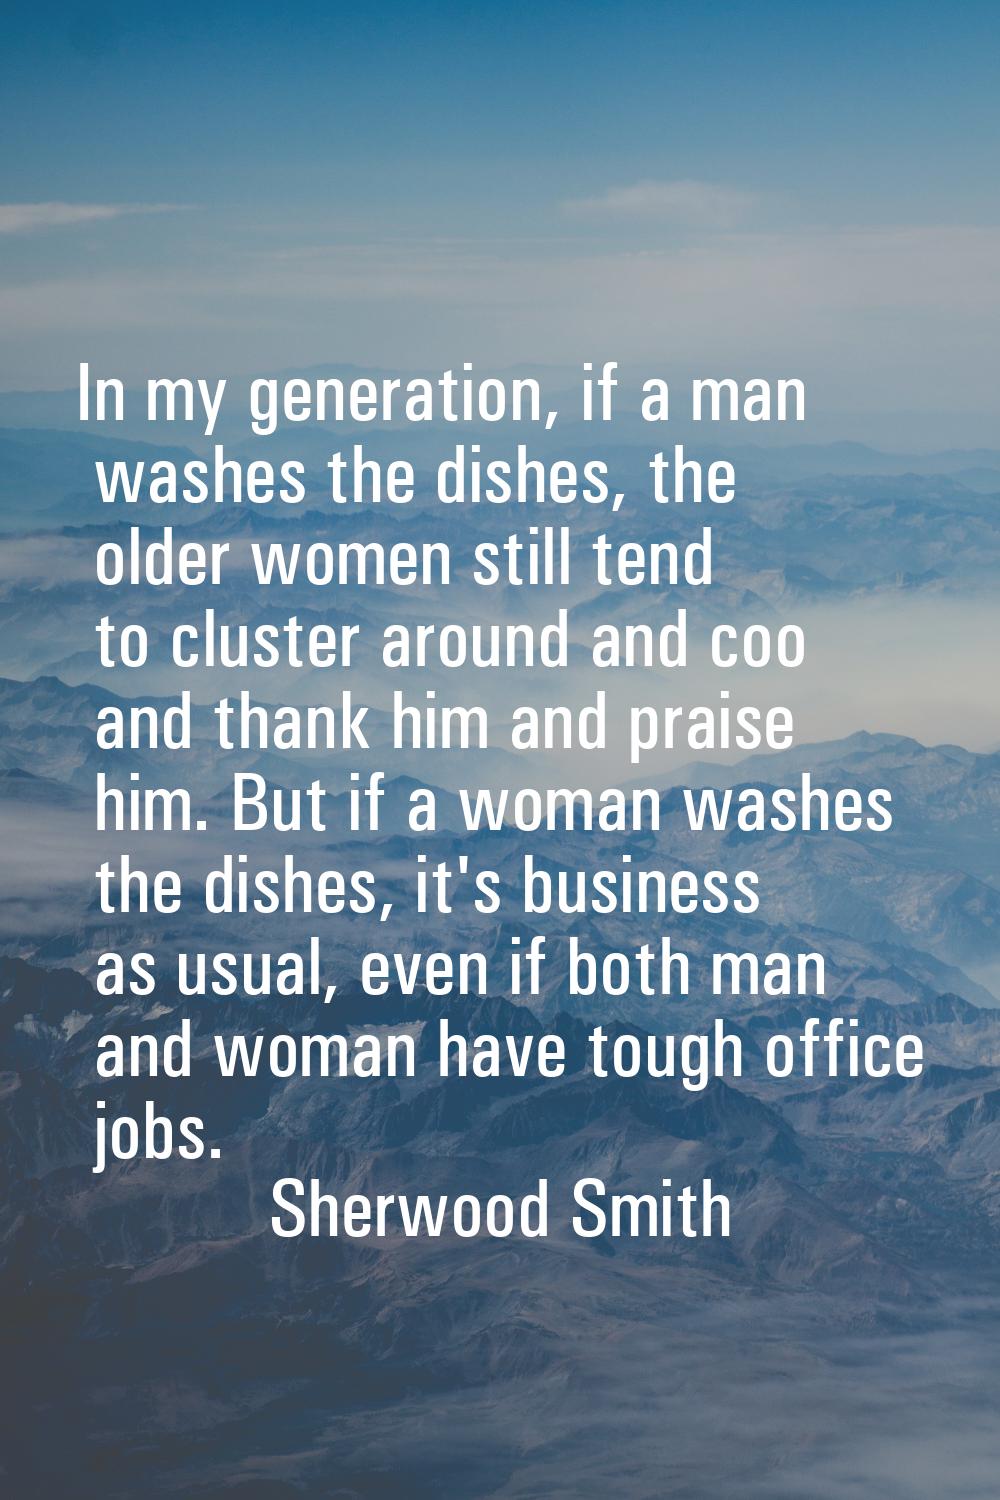 In my generation, if a man washes the dishes, the older women still tend to cluster around and coo 